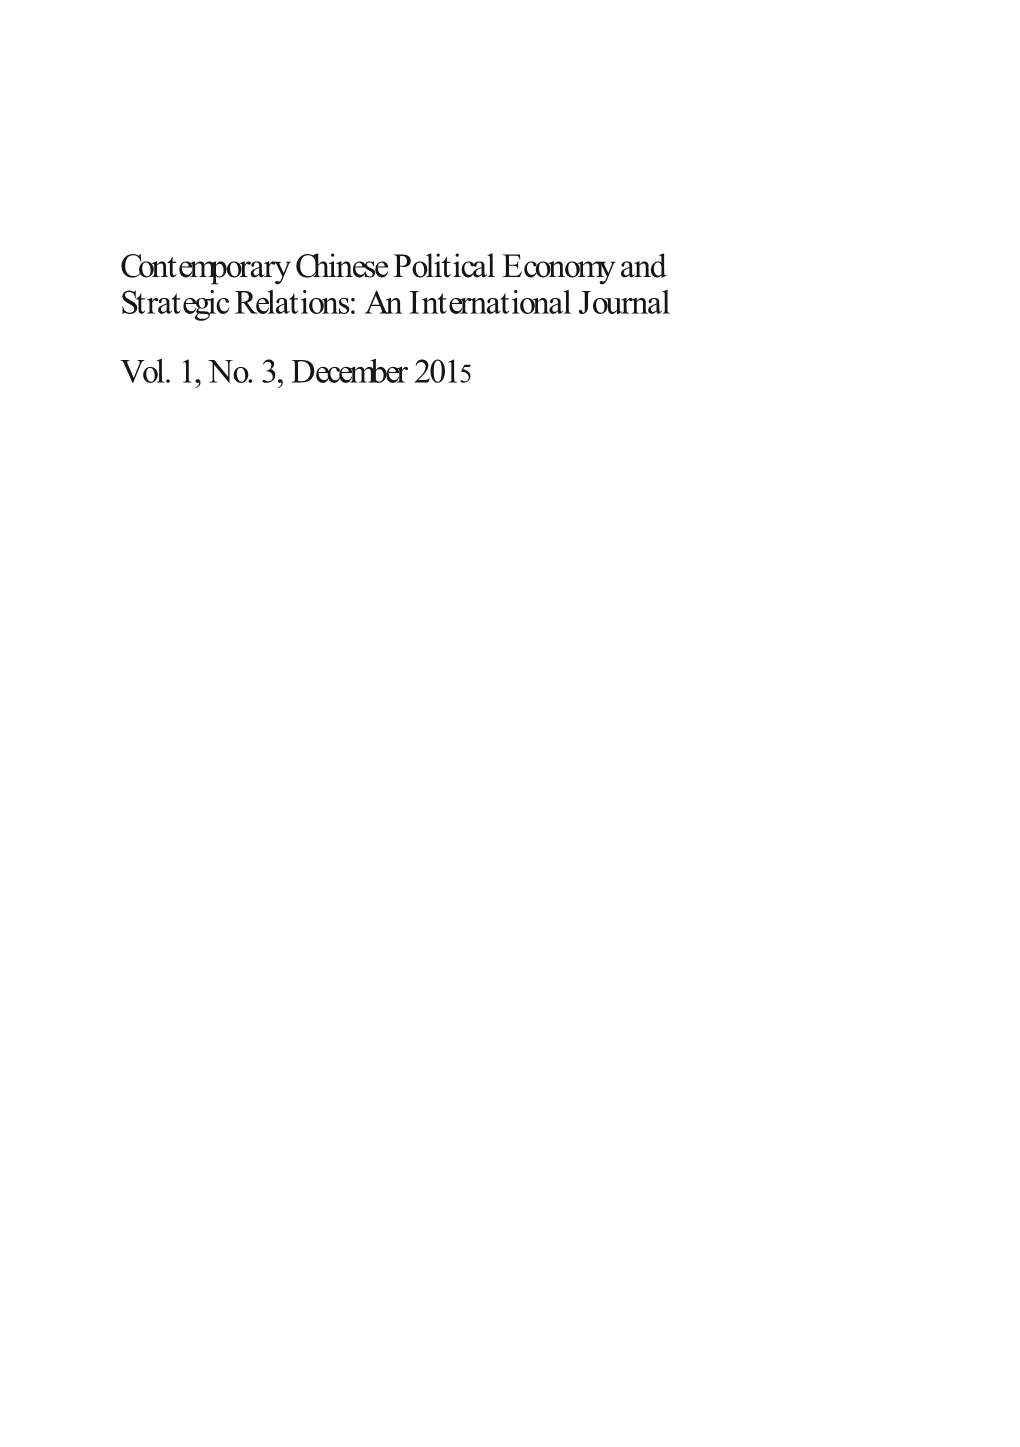 Contemporary Chinese Political Economy and Strategic Relations: an International Journal